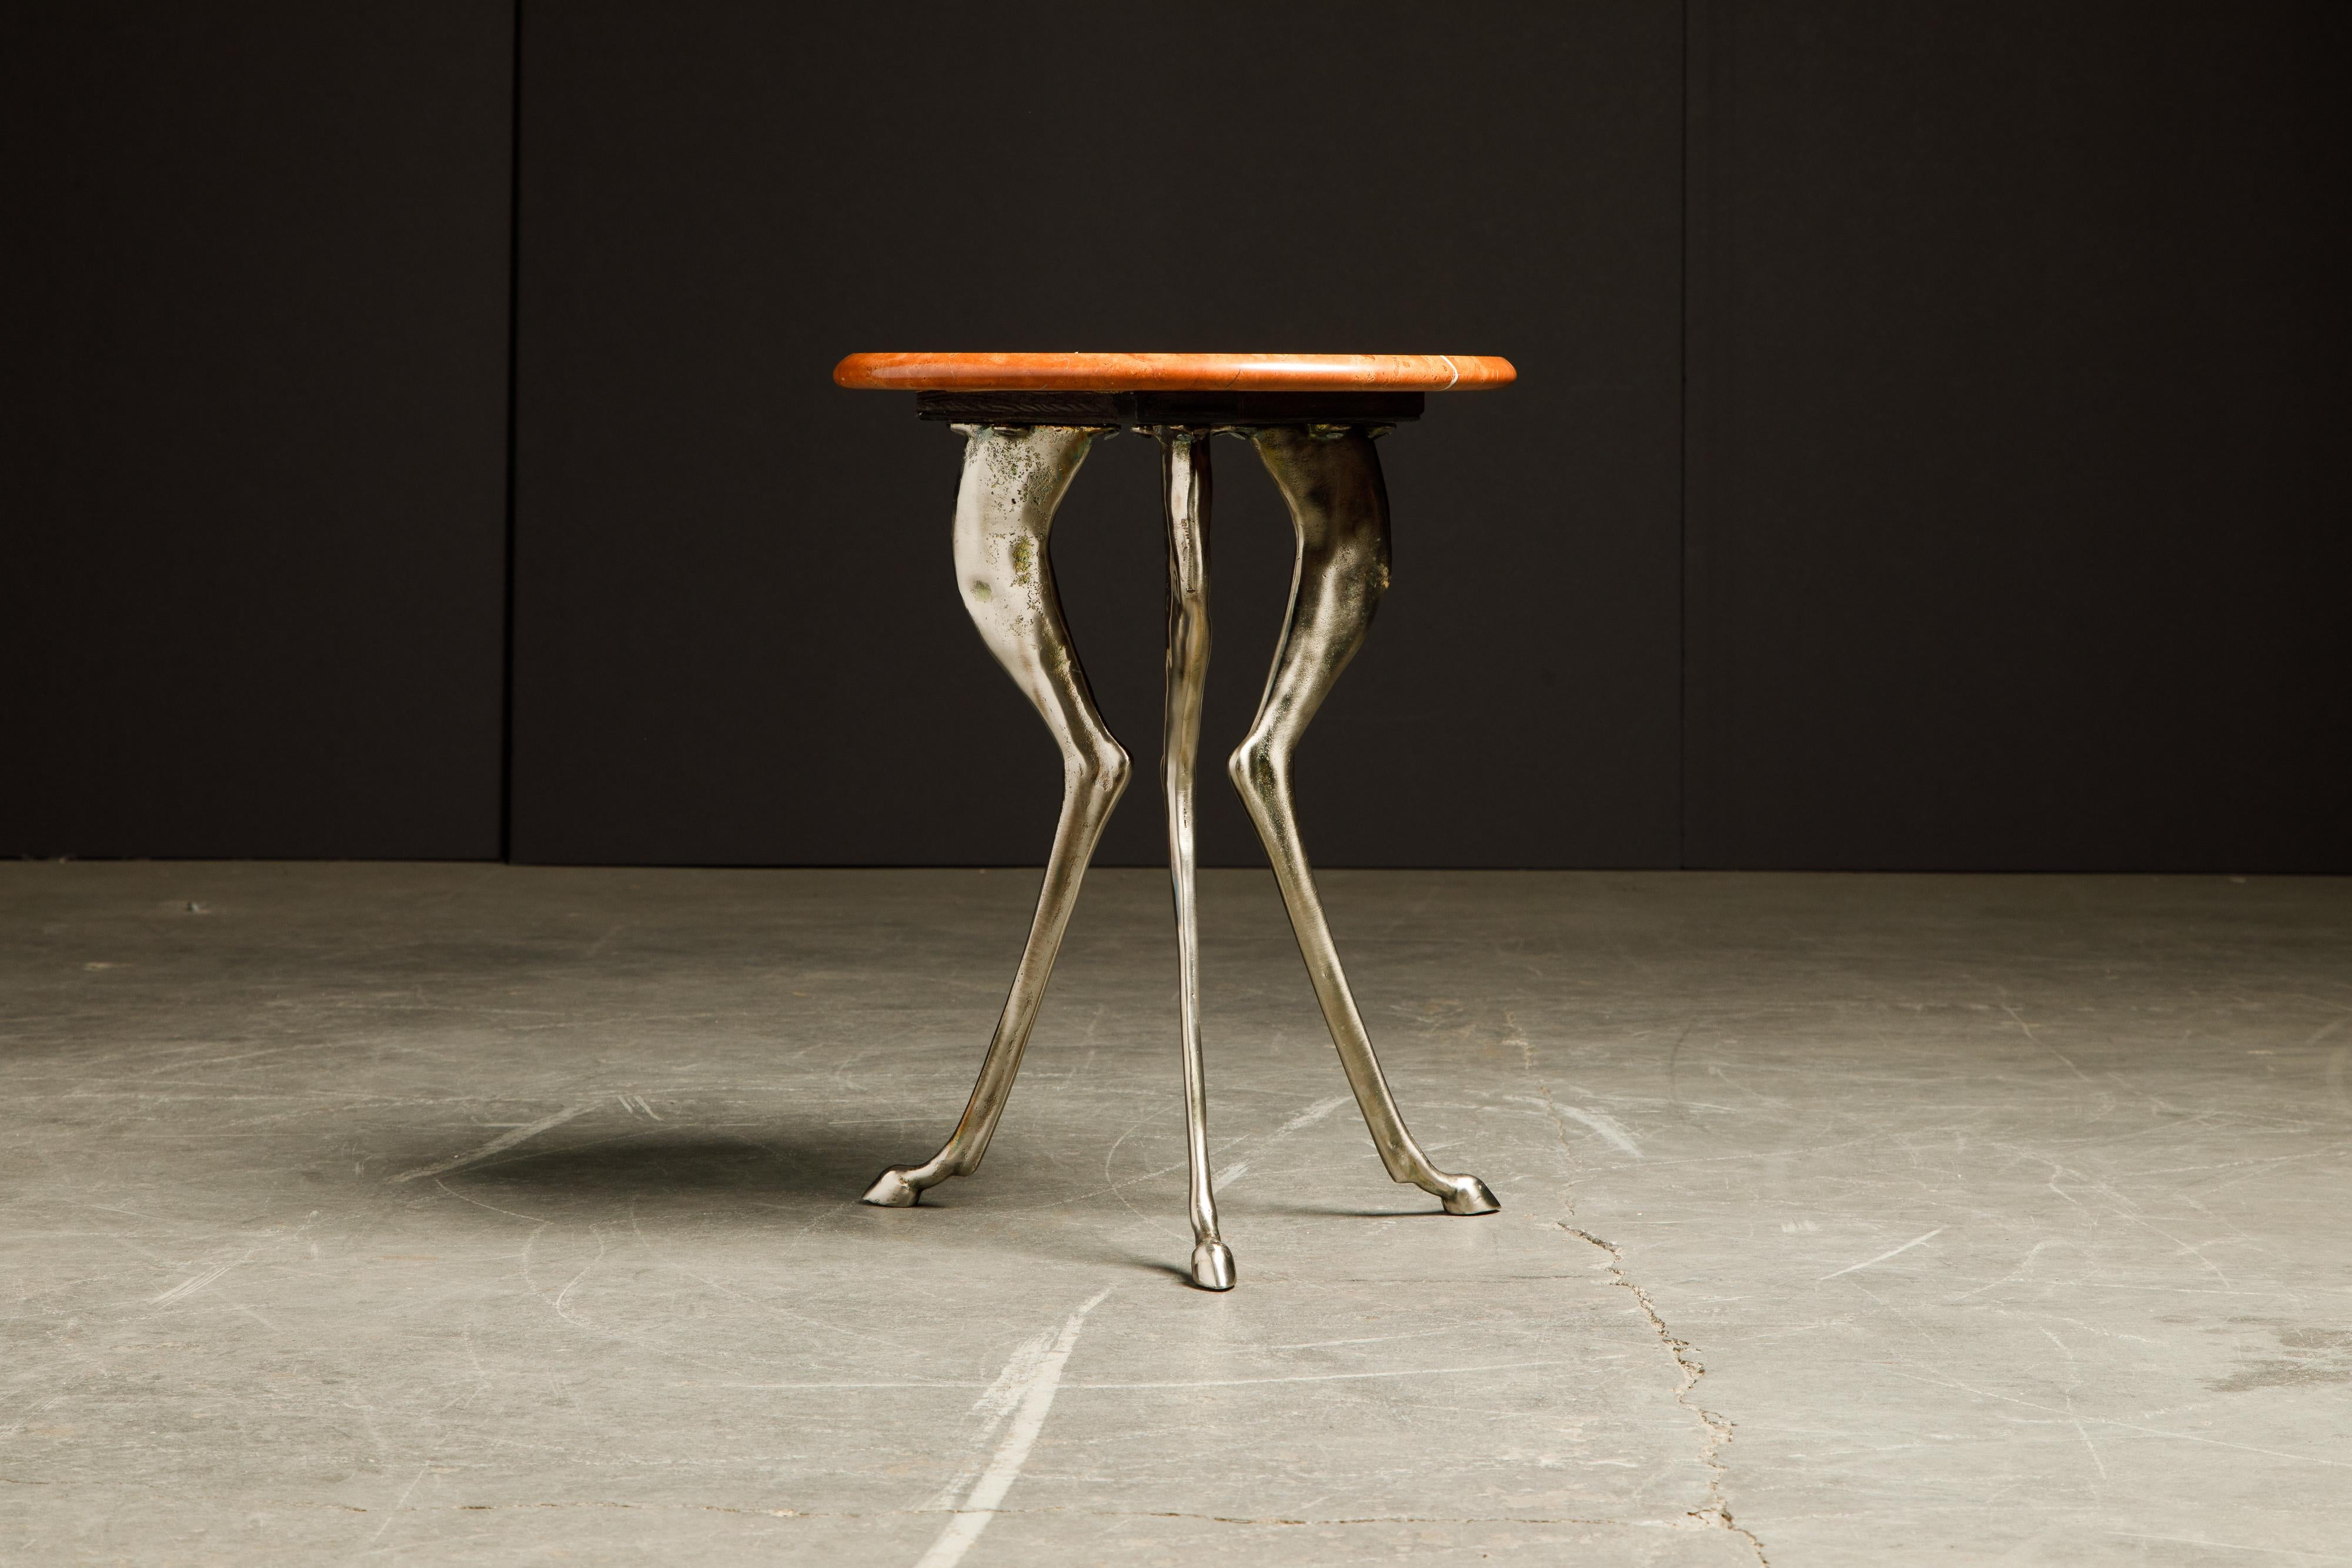 An incredible aluminum three-legged anthropomorphic side table, in the style of Silas Seandel and John Dickinson, with some similarities in concept to the 'African' plaster tables. This amazing piece is very heavy and topped with a beautiful red